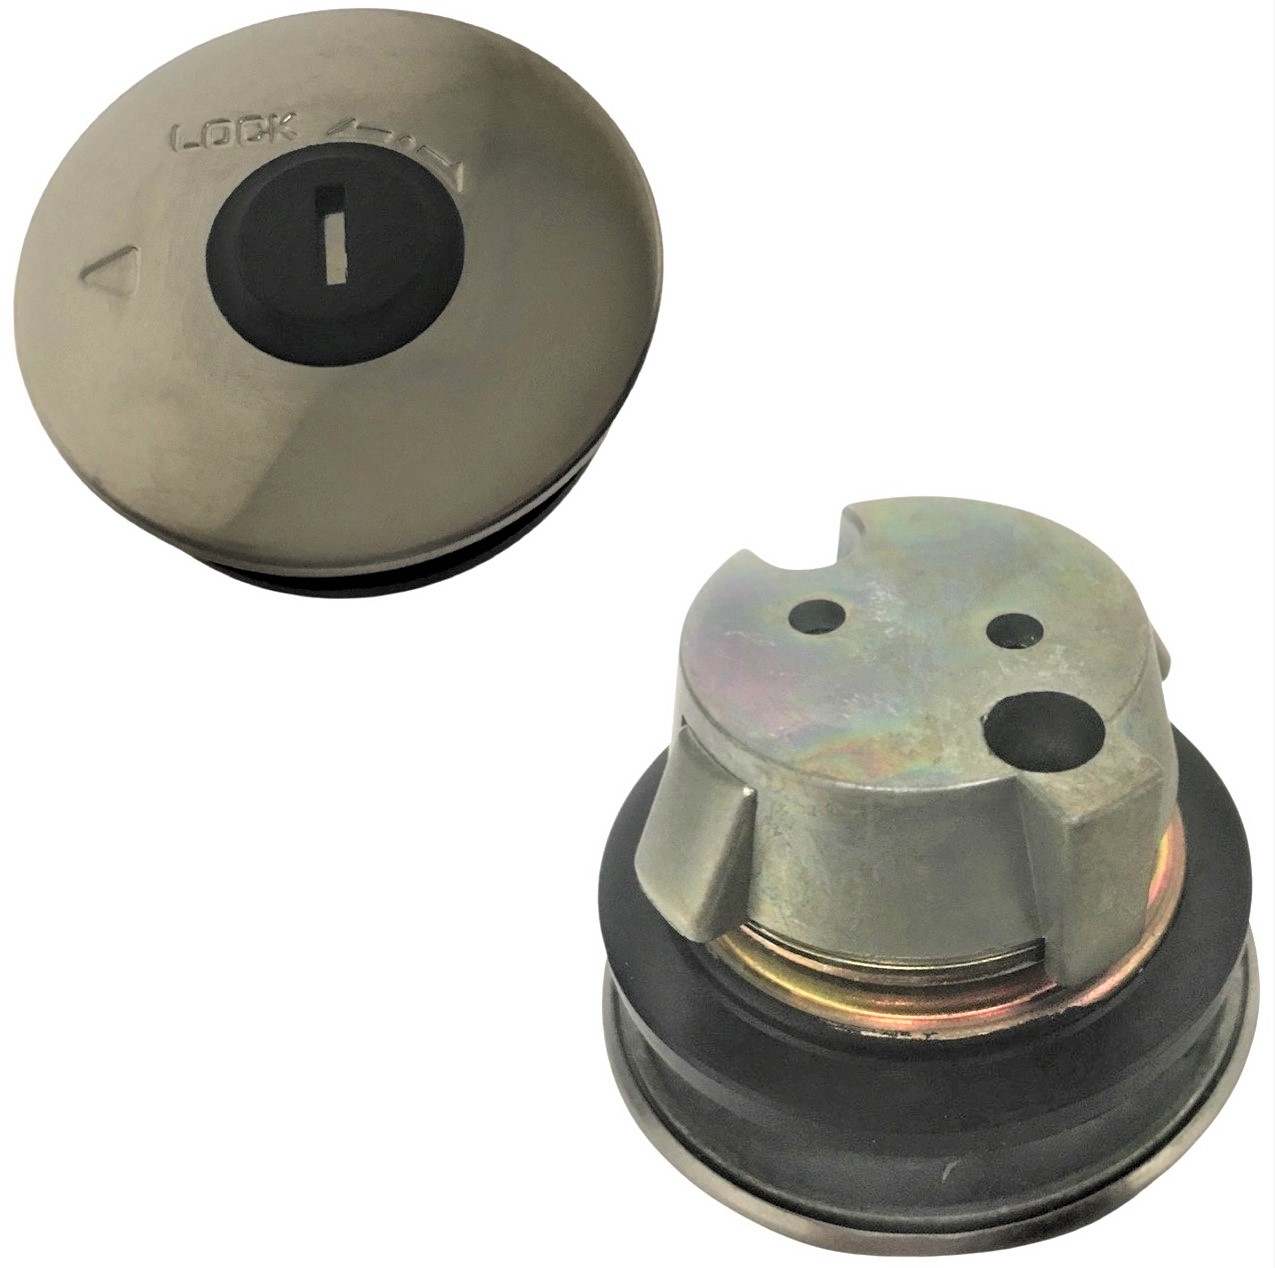 Ignition Switch Fits E-Ton Beamer 50, Matrix 50, 49cc Scooters + Others. 3 Pins in 4 Pin FM Jack Bolt holes Ctr to Ctr= 50mm - Click Image to Close